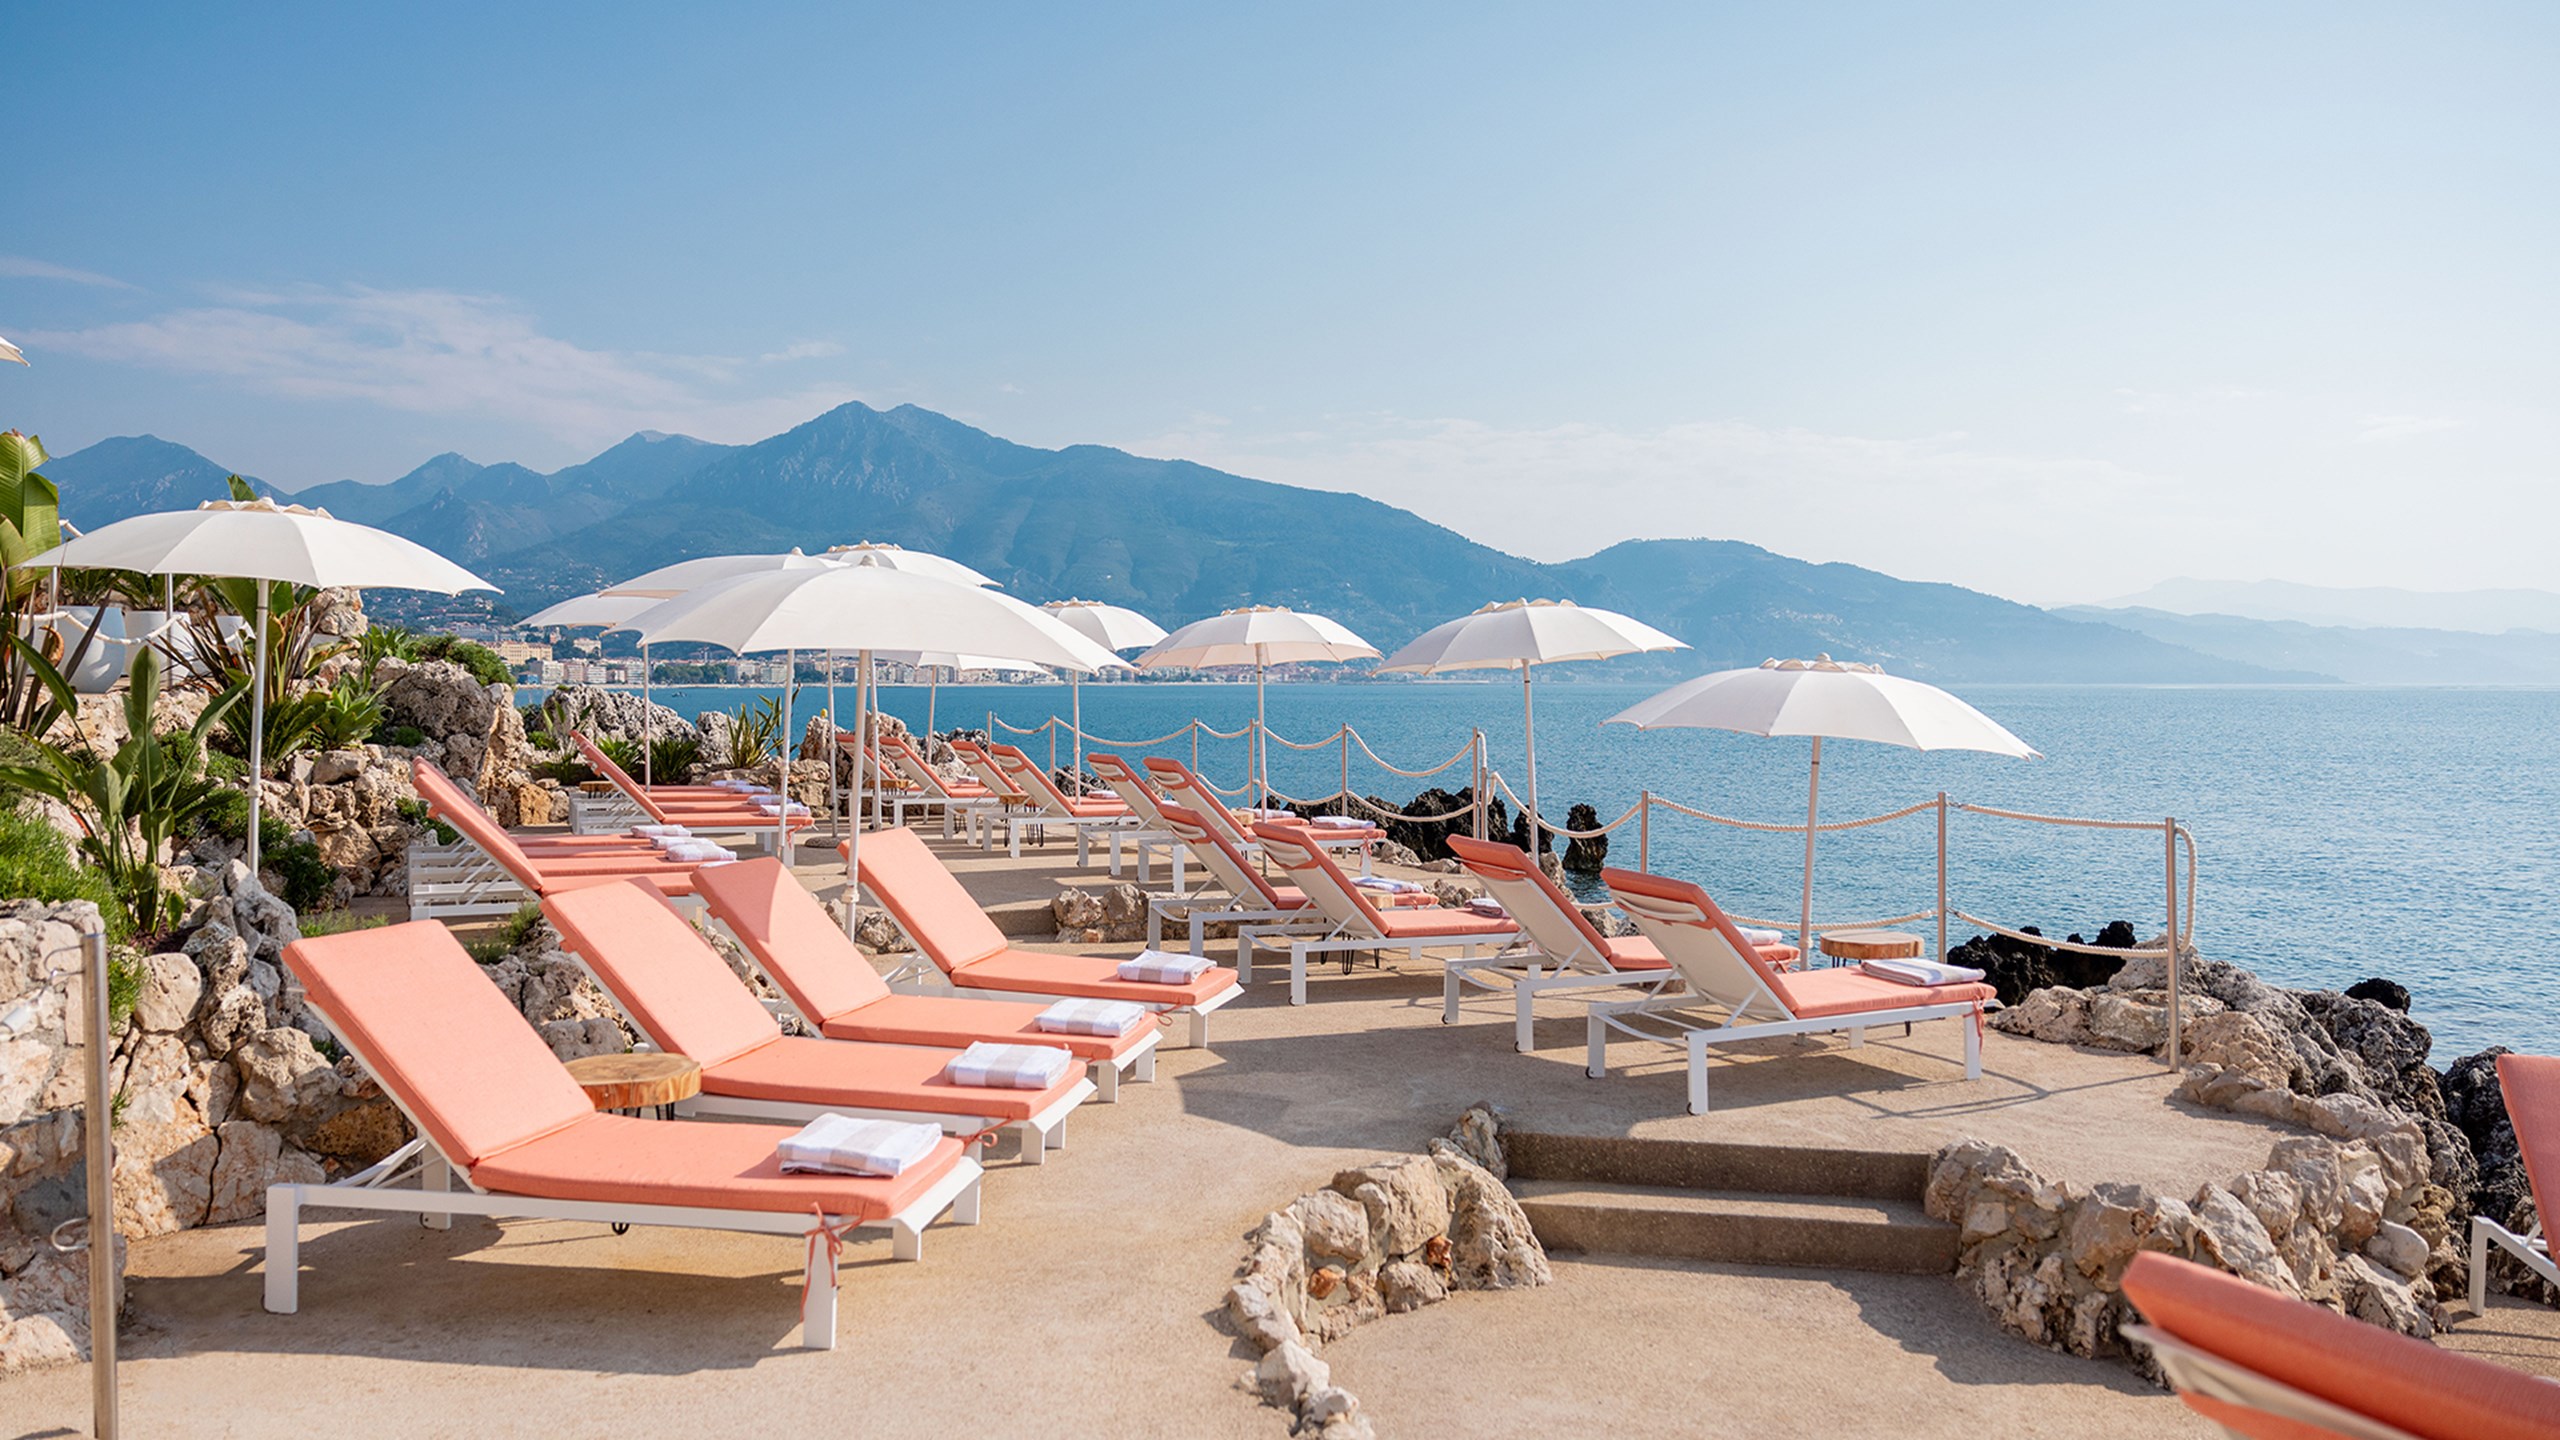 Maybourne La Plage - View of the orange - pink sun loungers with the white sun shaders, next to the sea and with the mountains in the background.